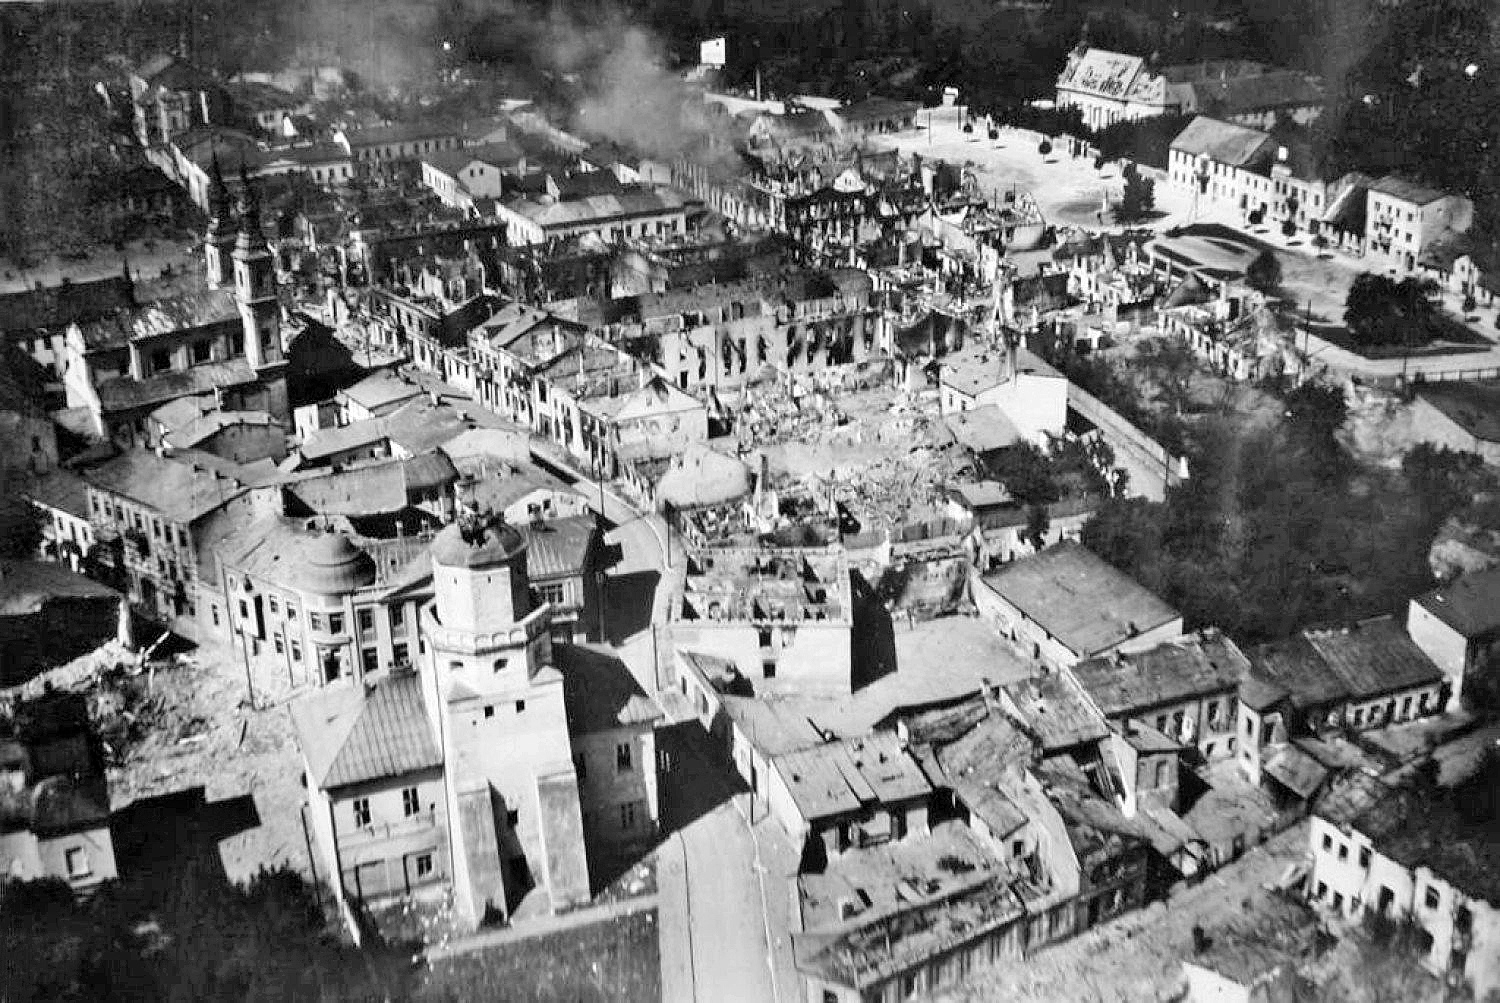 City of Wielun, Poland damaged after German aerial bombing, early Sep 1939